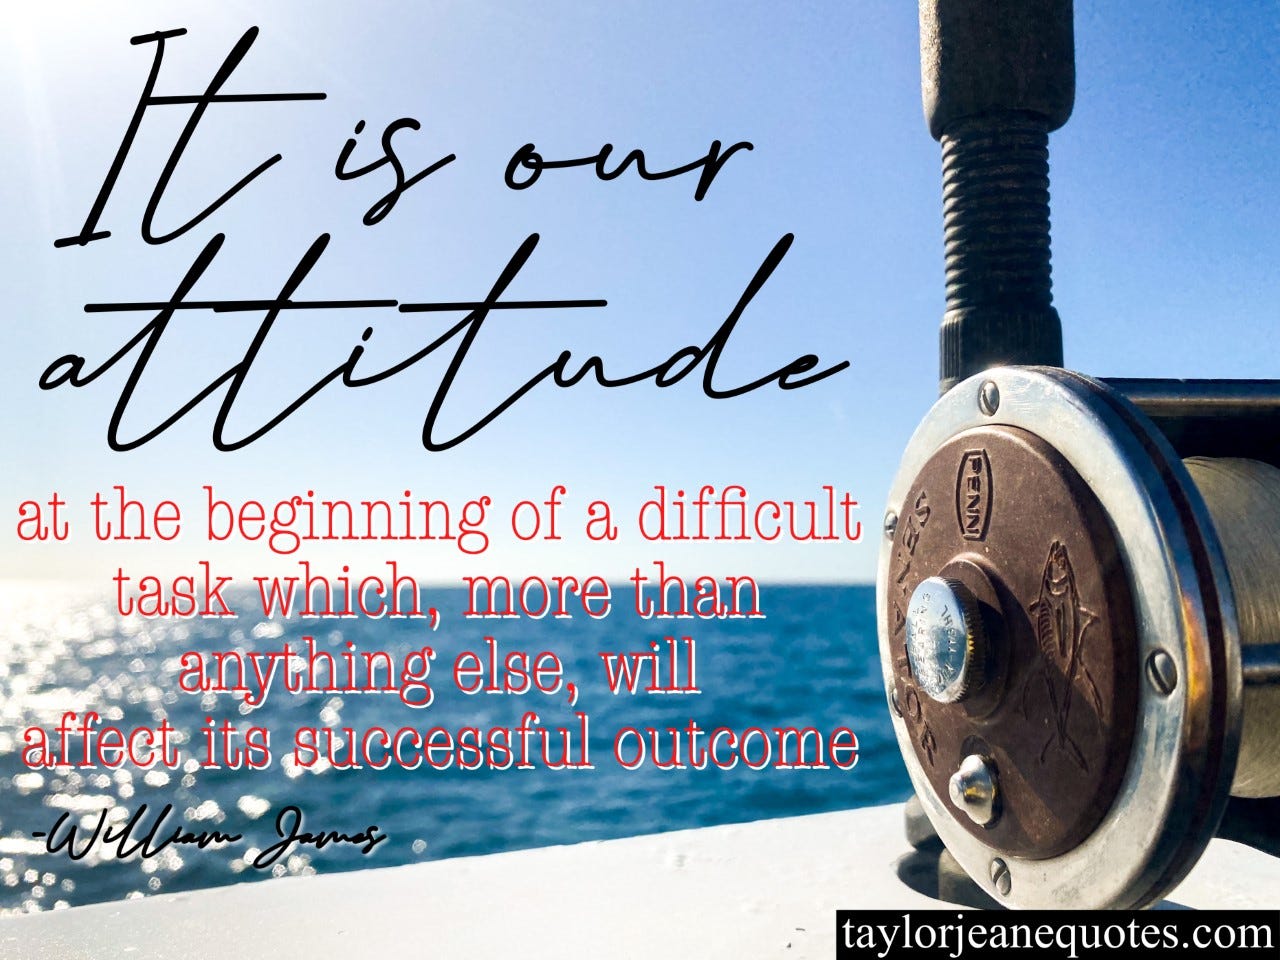 taylor jeane quotes, taylor jeane, taylor wilson, william james, william james quotes, inspirational quote of the day, motivational quote of the day, attitude quotes, determination quotes, life quotes, direction quotes, goal quotes, mindset quotes, fishing rod, outcome quotes